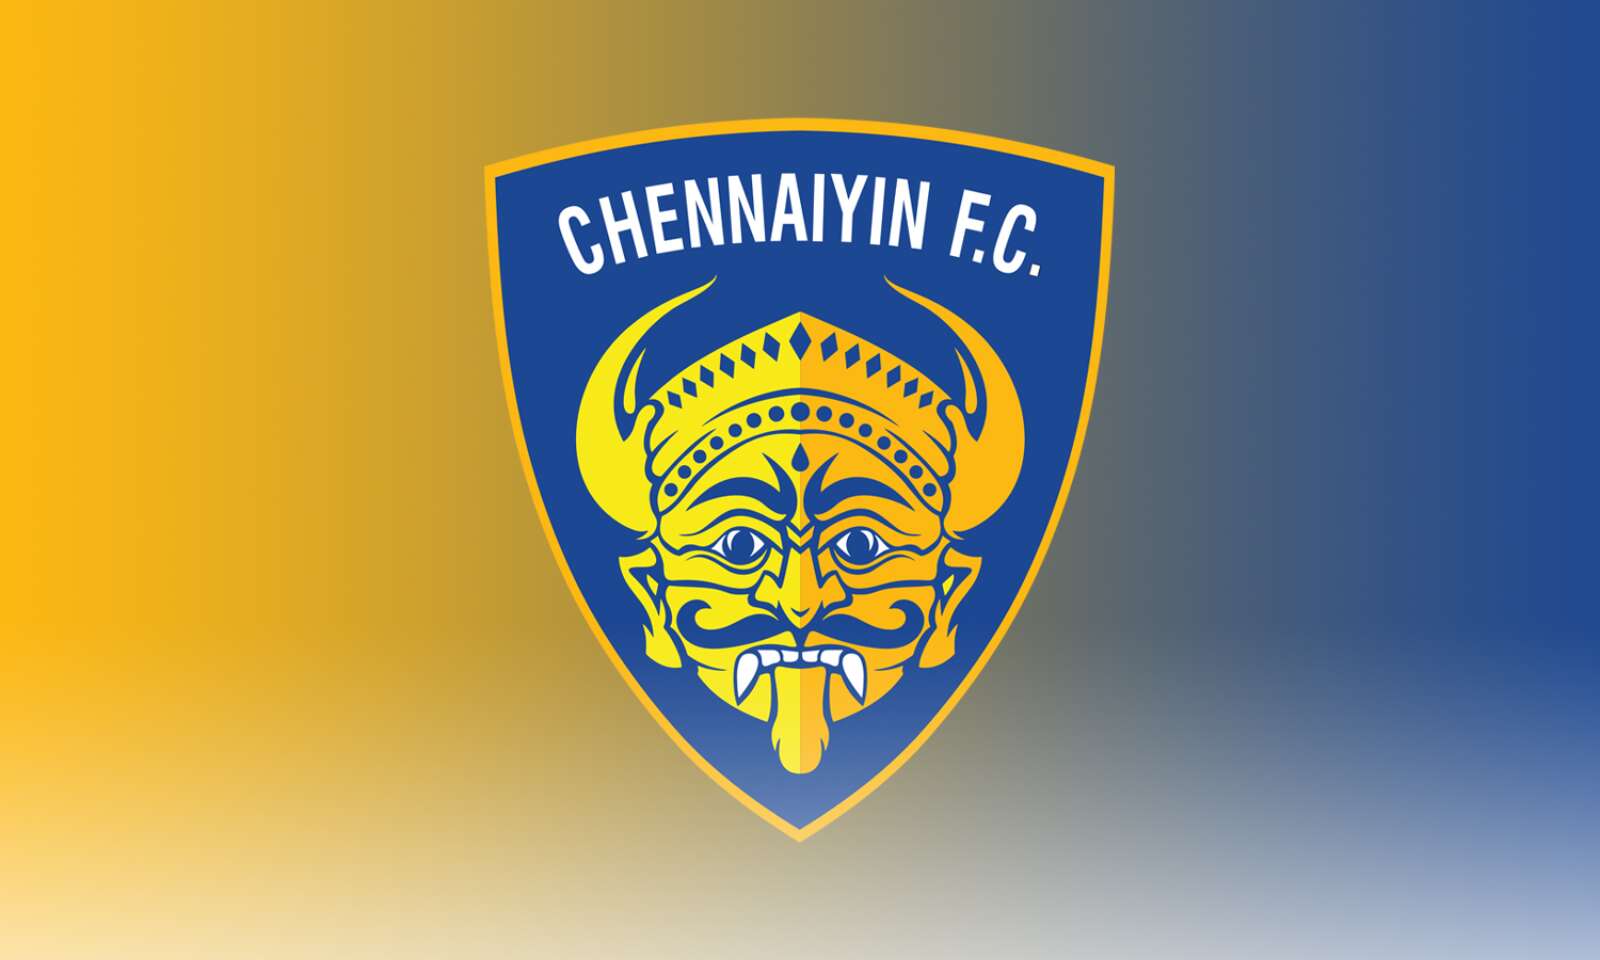 Chennaiyin FC vs FC Goa Live Football Streaming For Indian Super League  Match: How to Watch Chennaiyin FC vs FC Goa Coverage on TV And Online -  News18